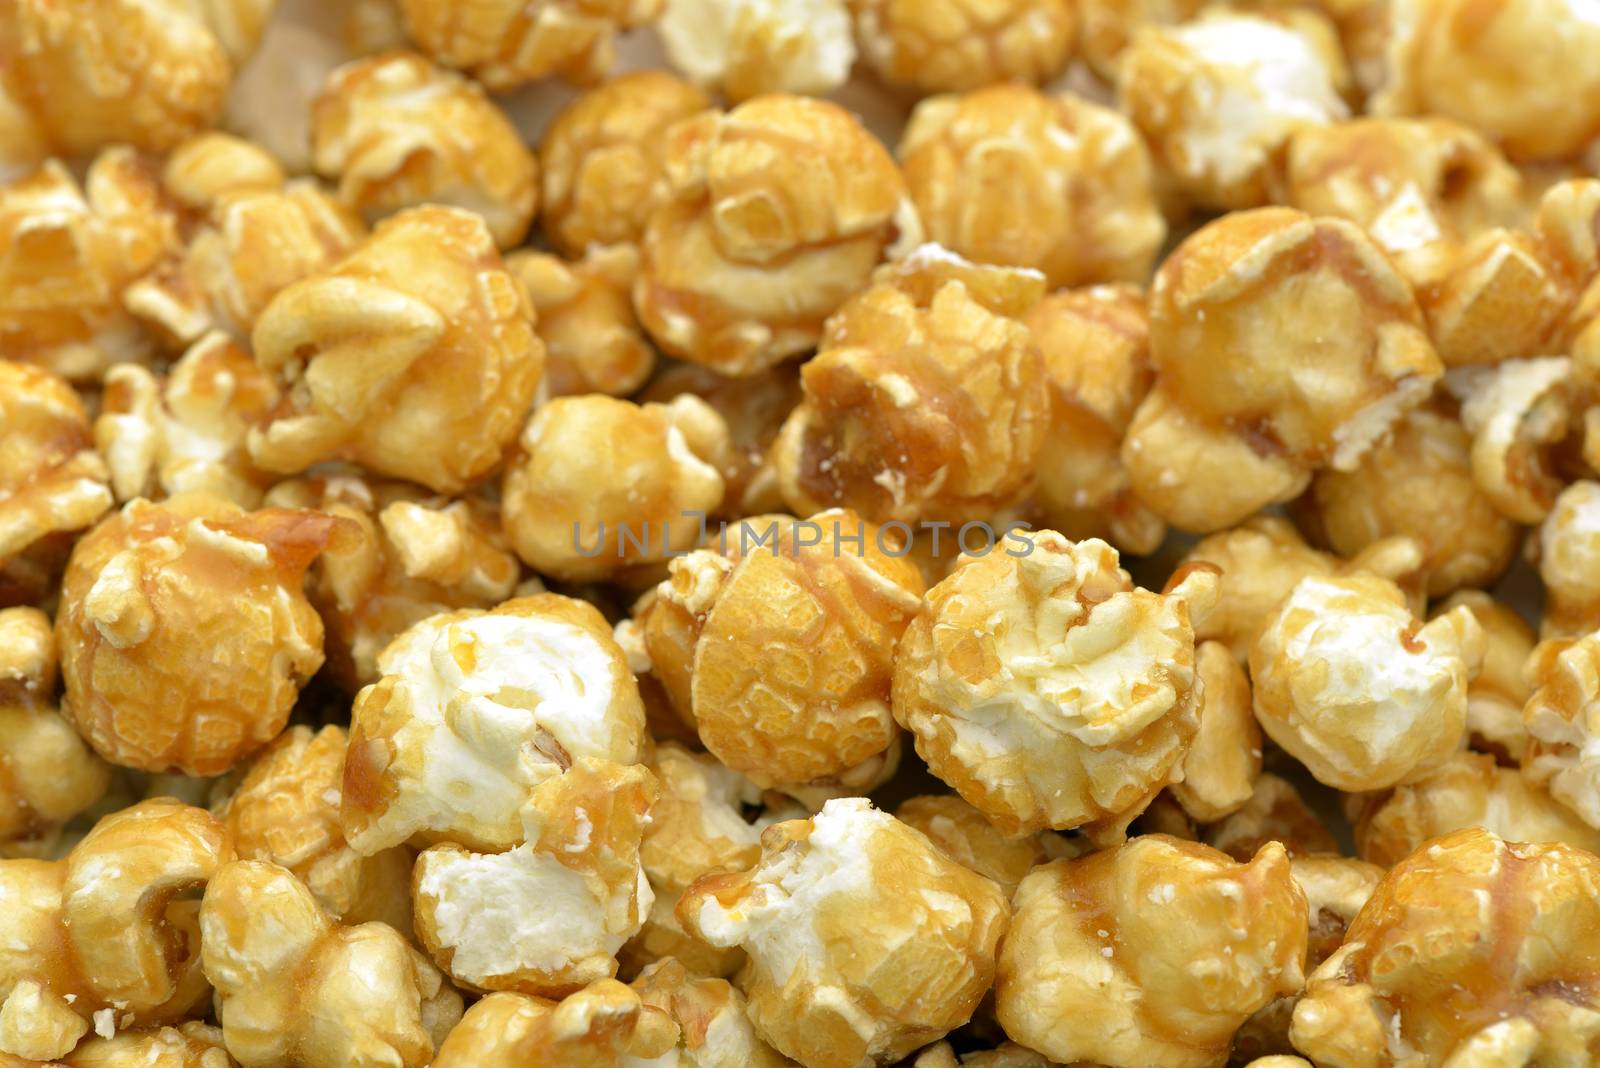 Close-up of caramelized popcorn to use as background